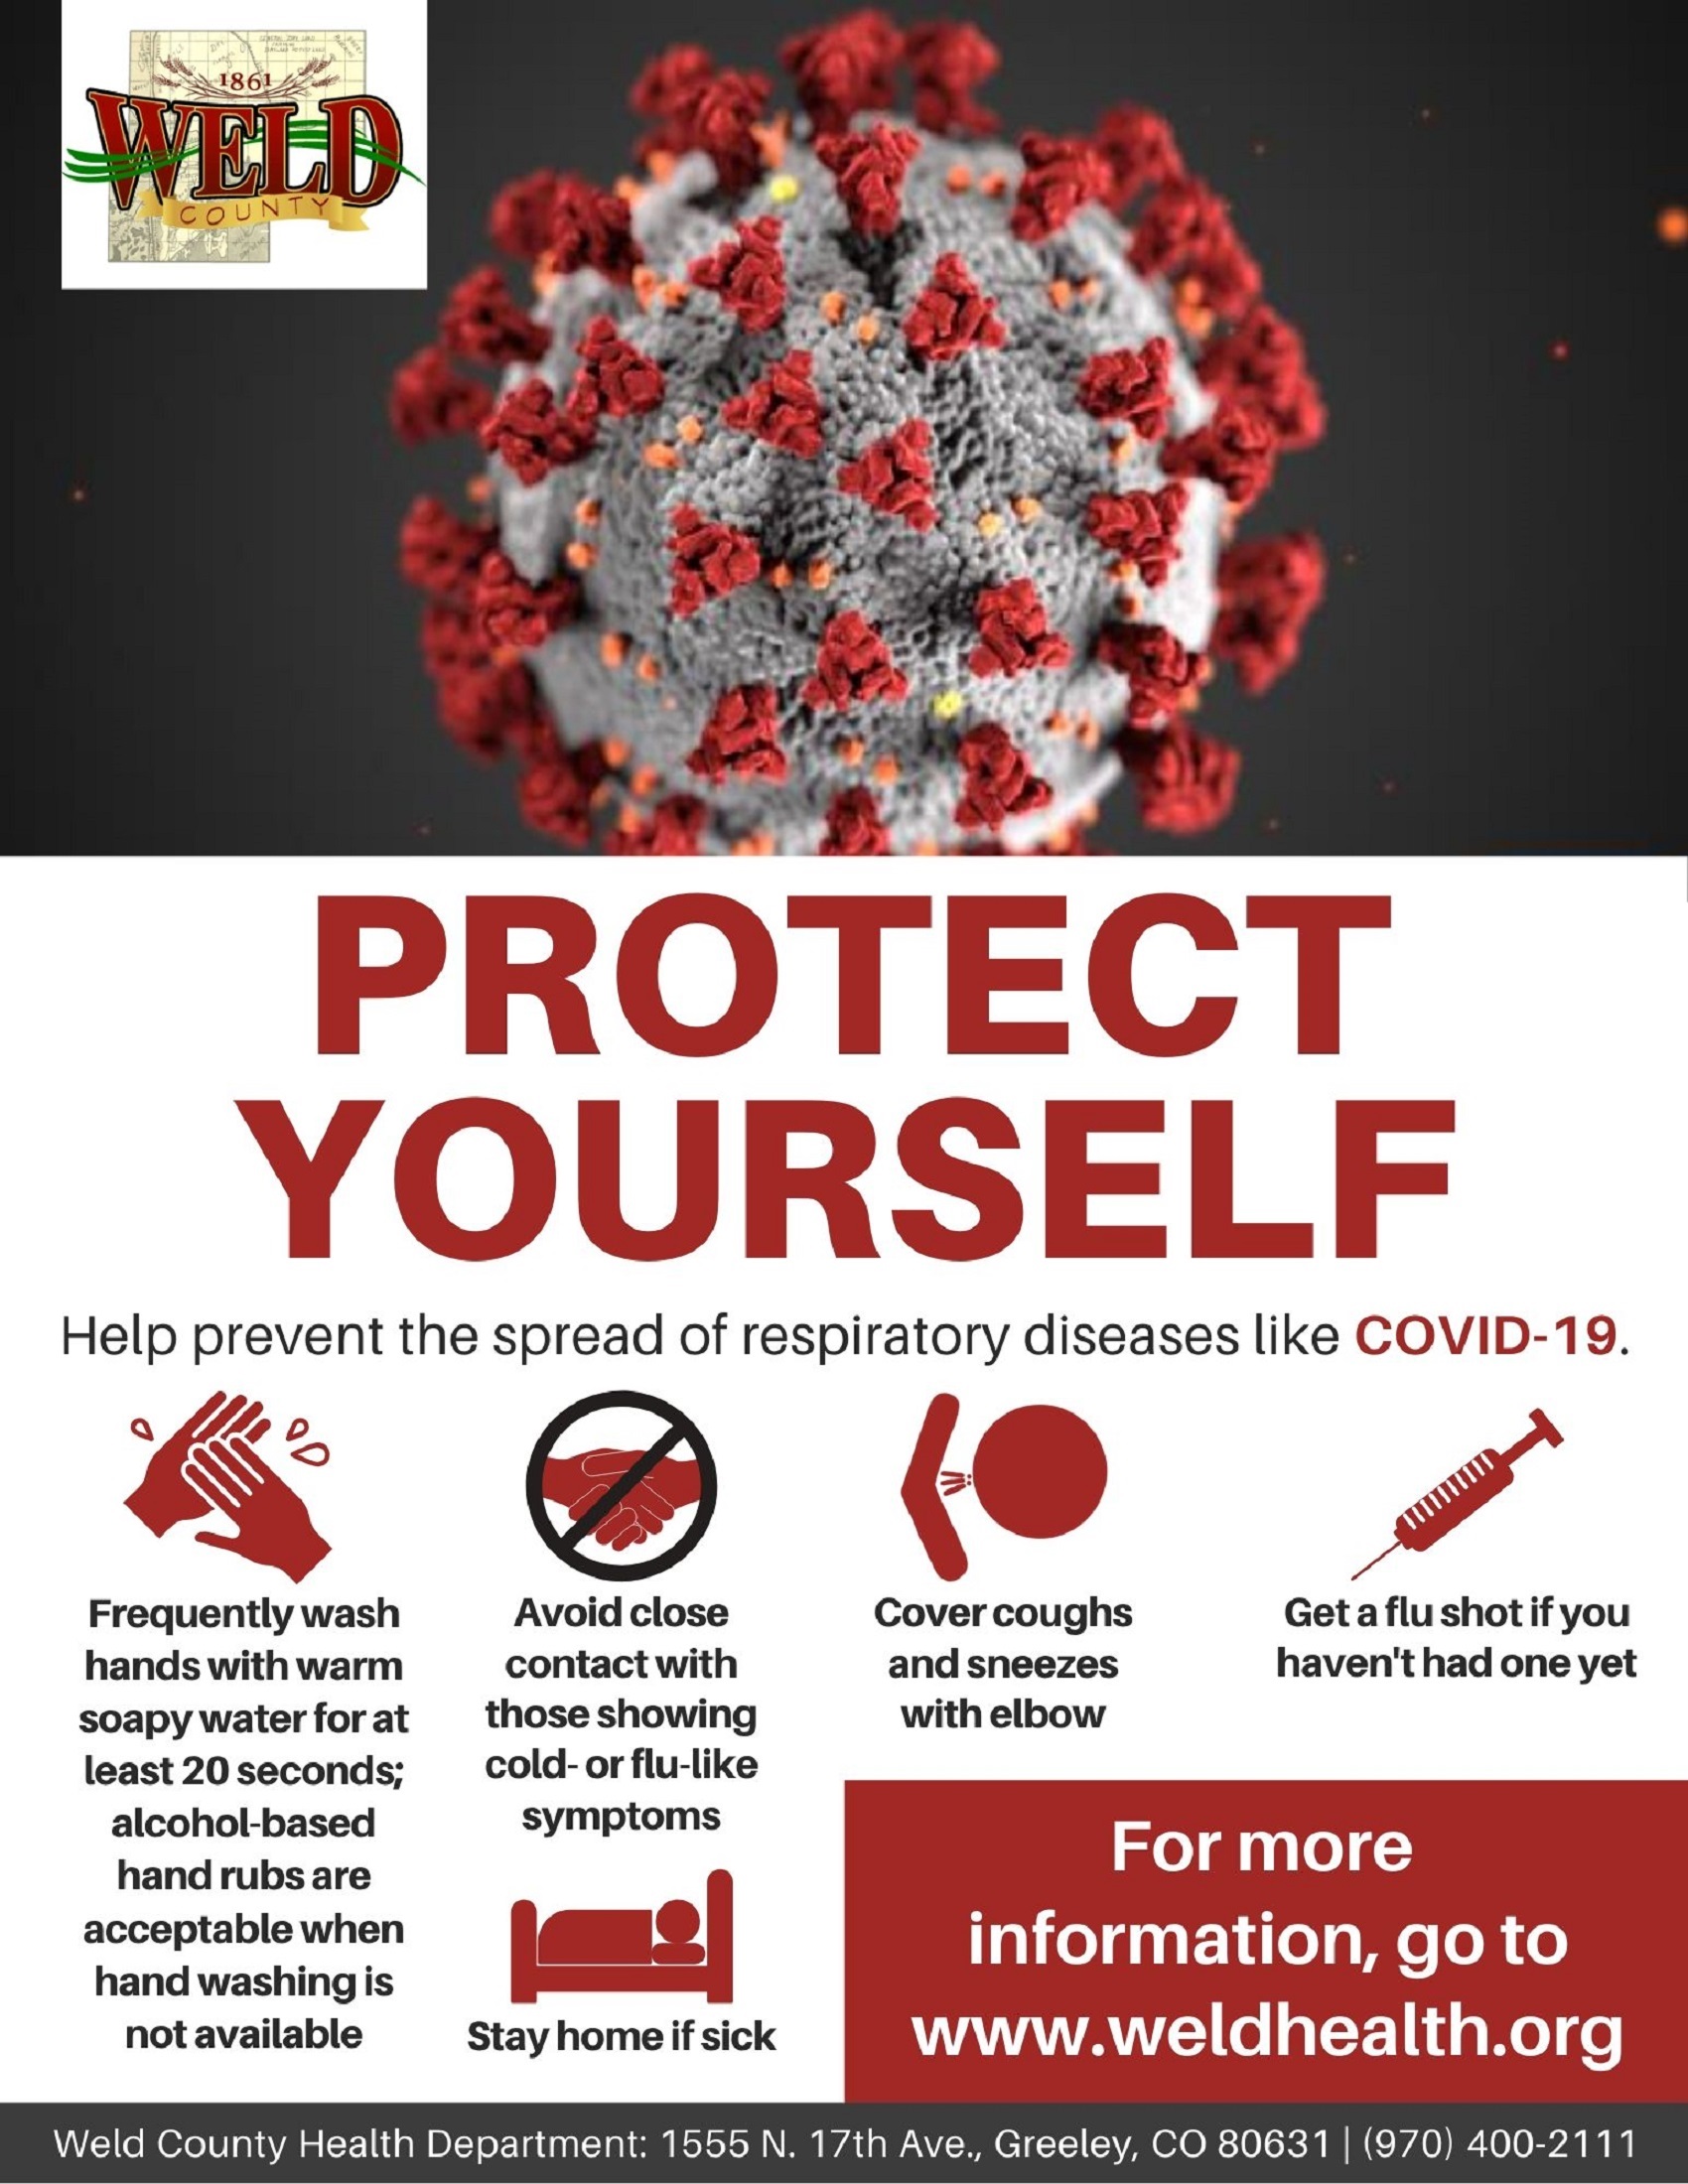 Weld County: Protect Yourself From COVID-19